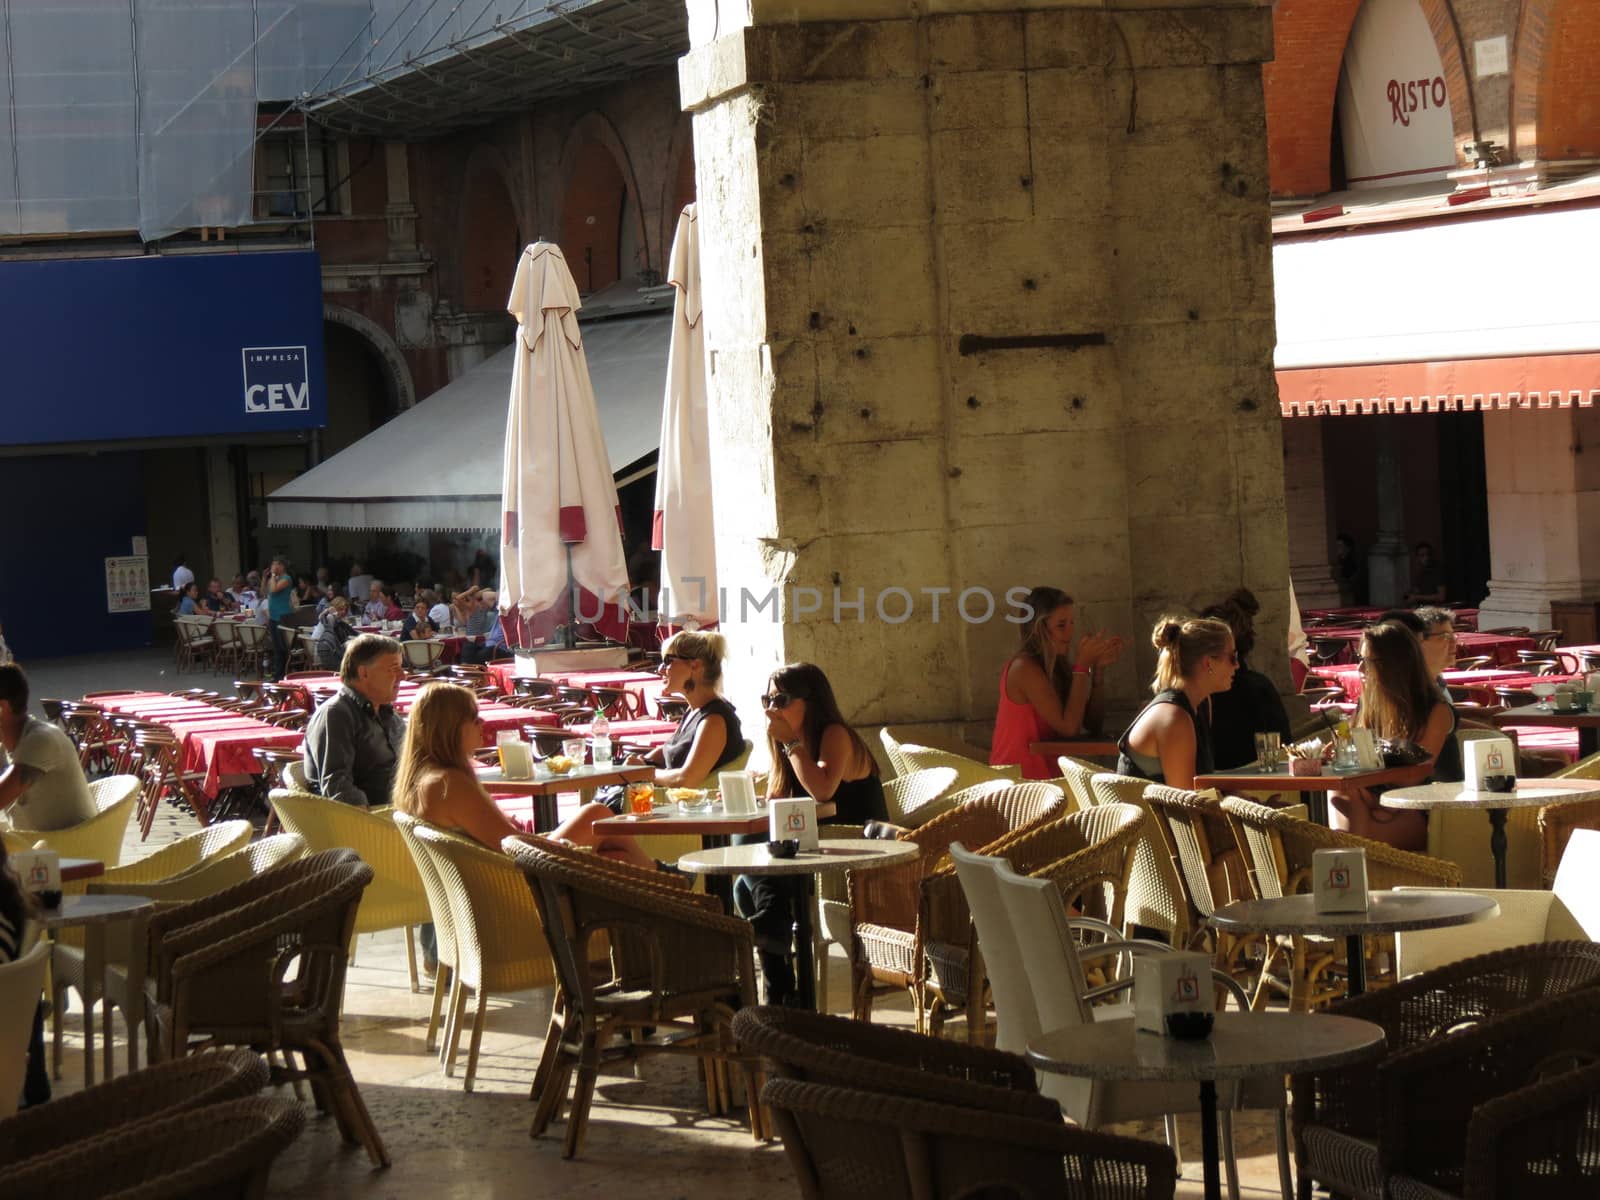 TREVISO, ITALY - CIRCA JULY 2014: customers sitting at an outdoor cafe in the piazza